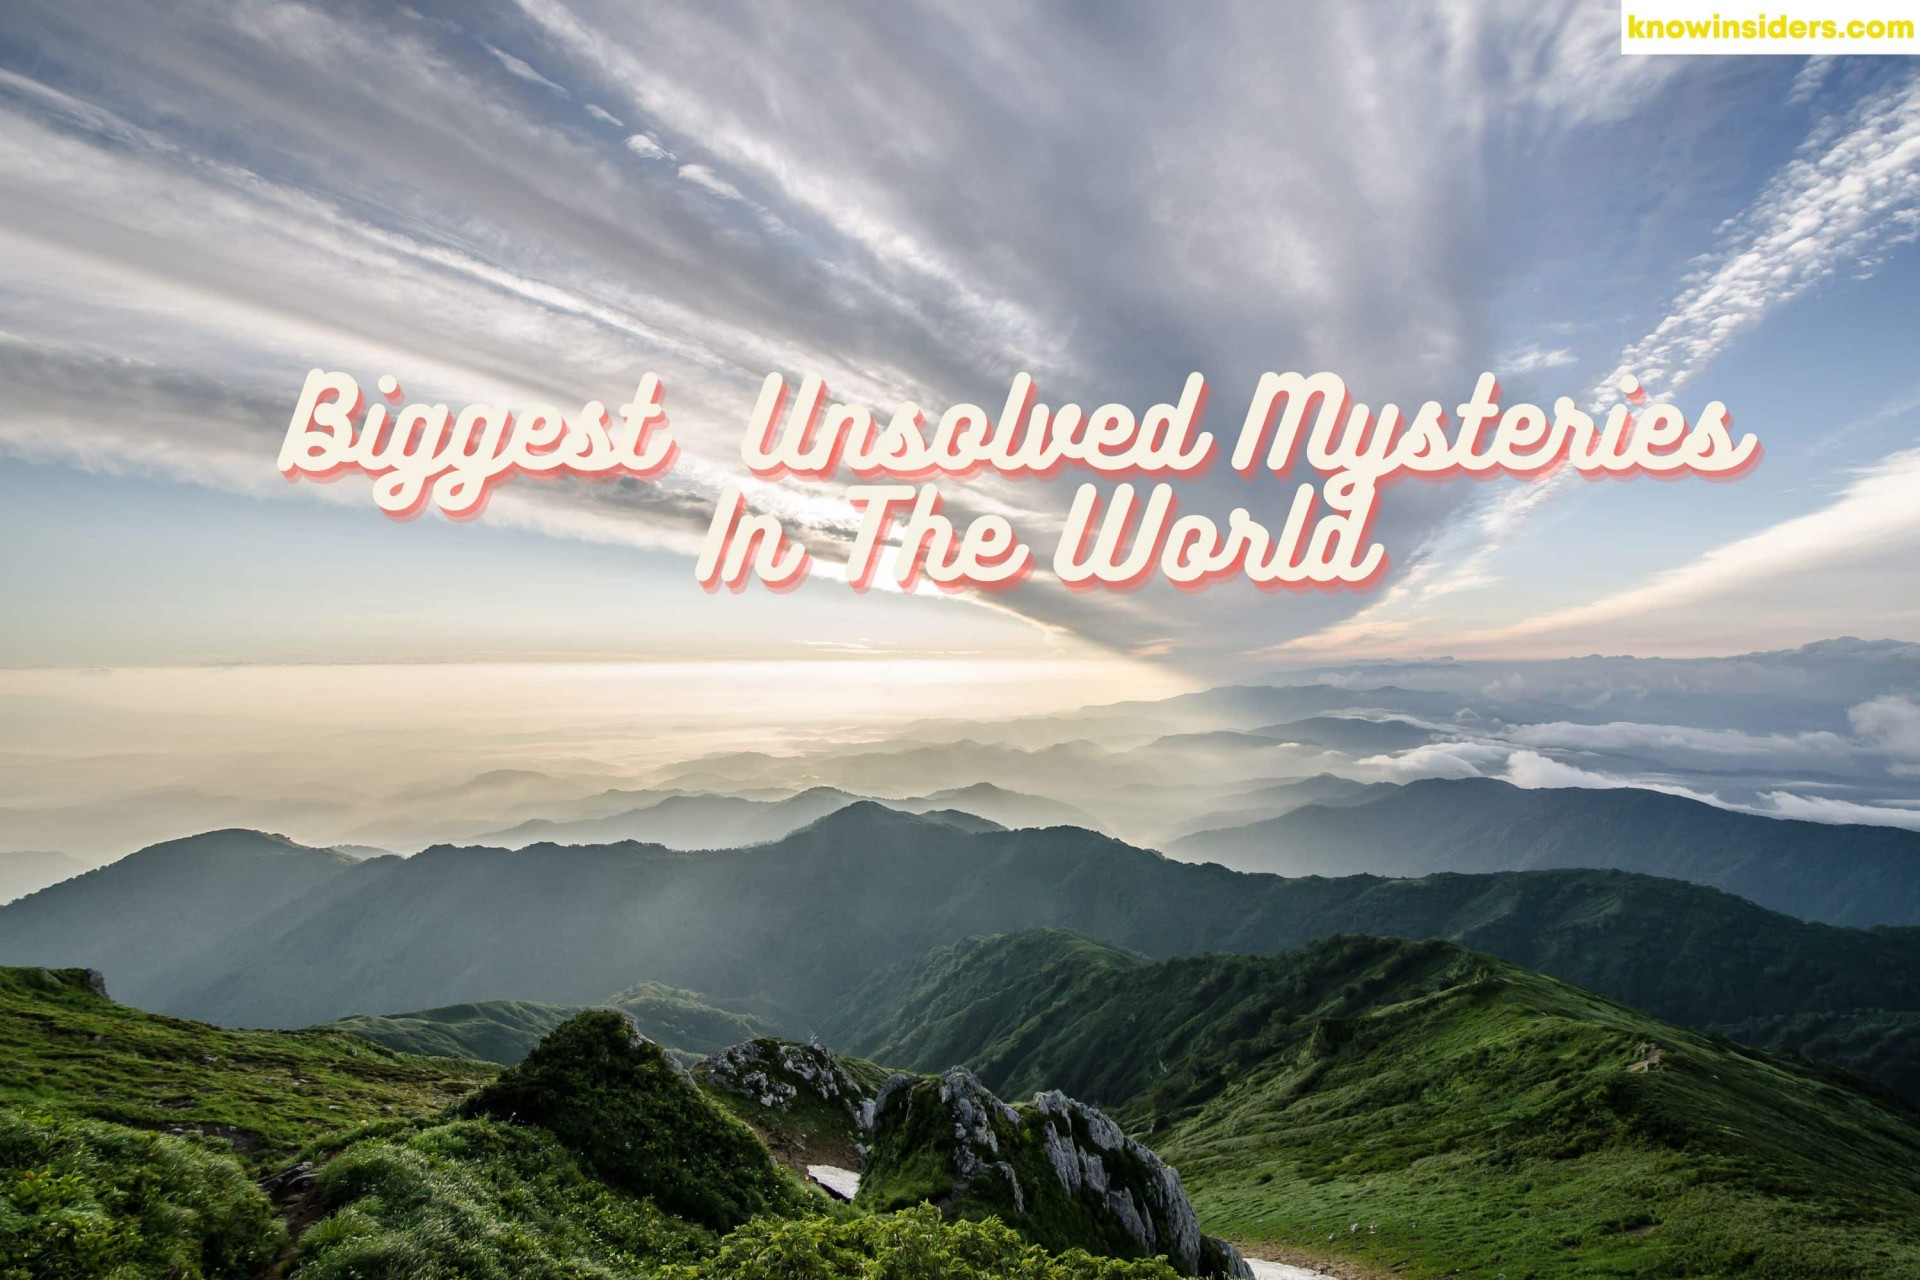 Top 7 Biggest Unsolved Mysteries on the Planet of All Time